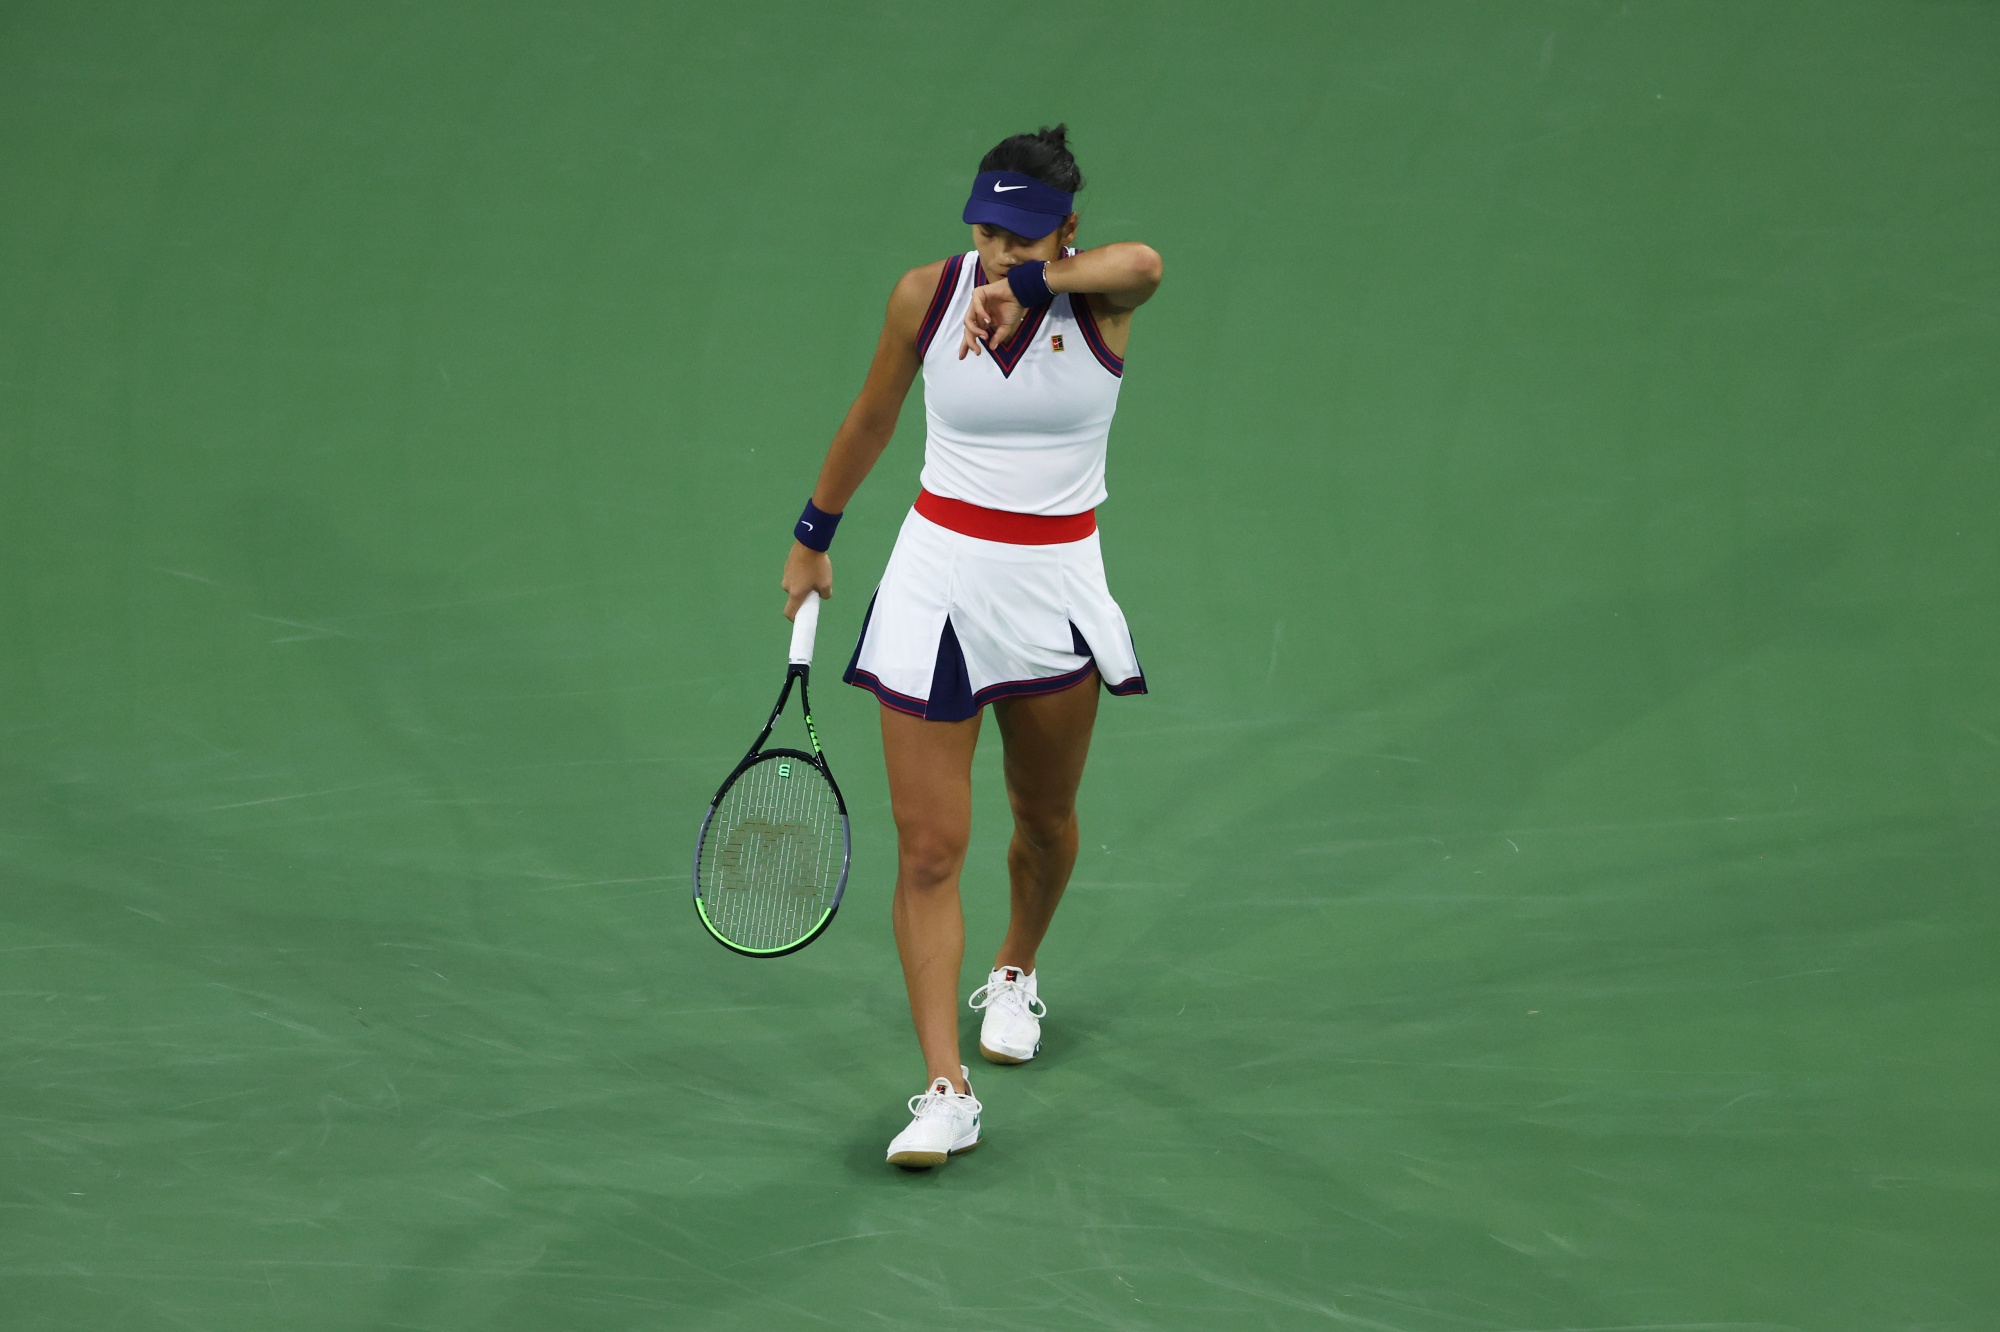 US Open Champ Raducanu Loses in 2 Sets At Indian Wells